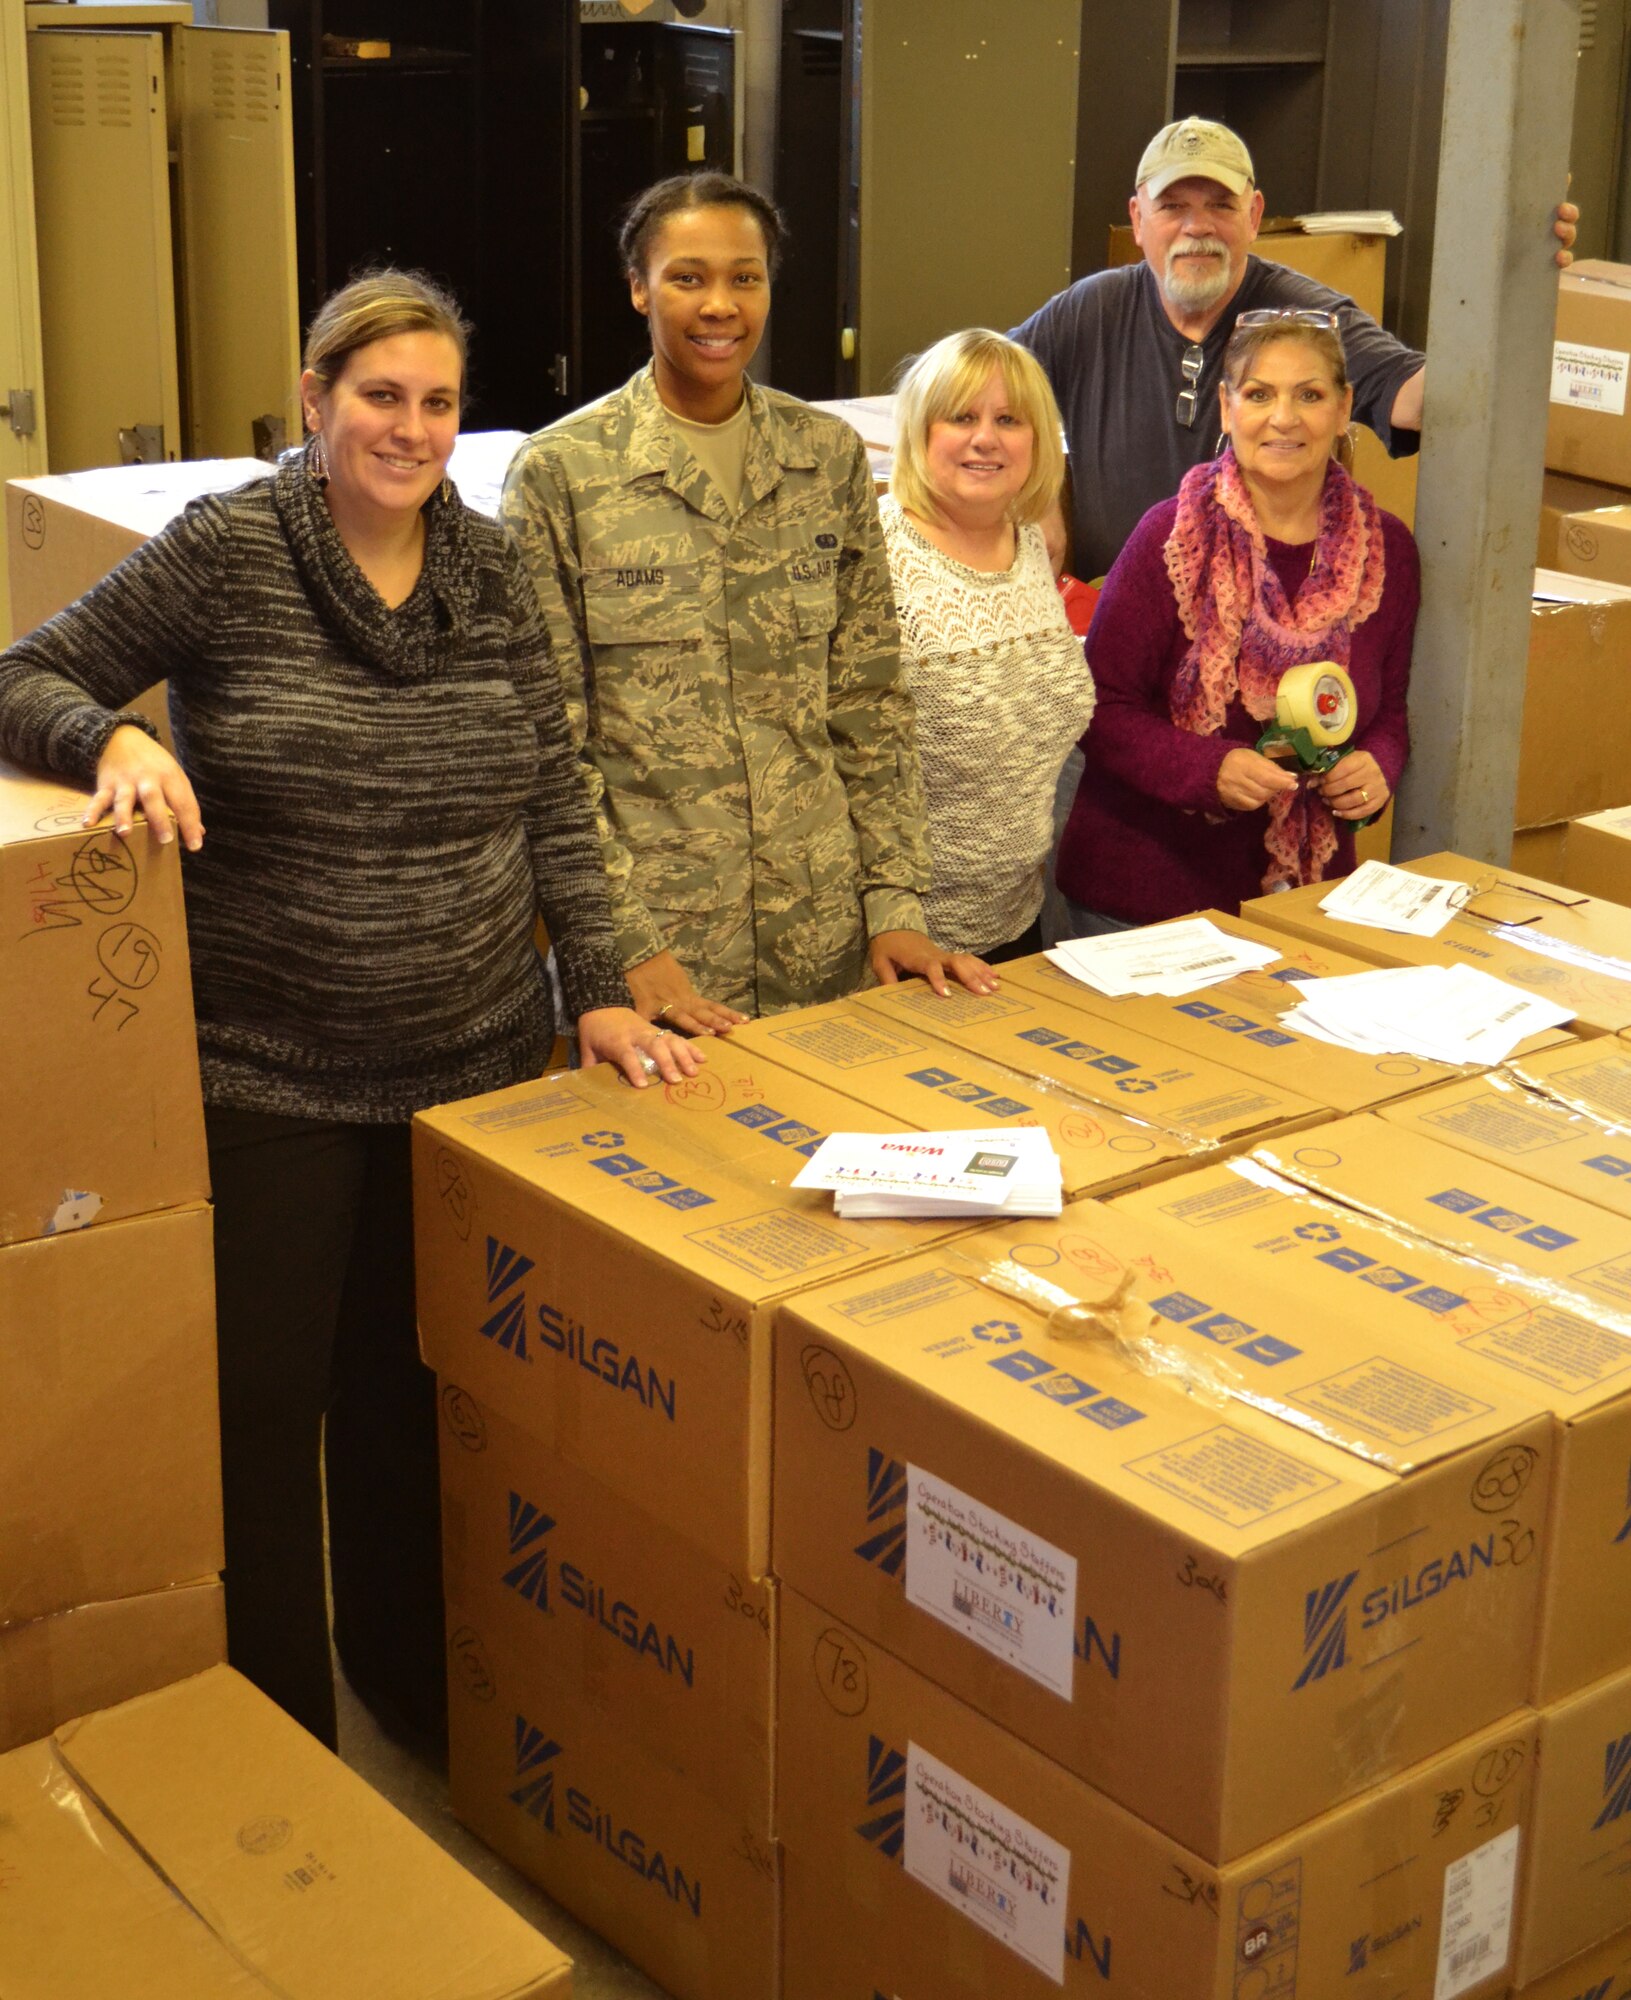 Members of the 111th Attack Wing, Liberty USO and volunteers stop working to take a photo with care packages they were preparing to send out at Horsham Air Guard Station, Pennslvania, Nov. 19, 2015. An estimated 5,000 package will be sent to deployed service members. (U.S. AIr National Guard photo by Tech. Sgt. Andria Allmond/Released)